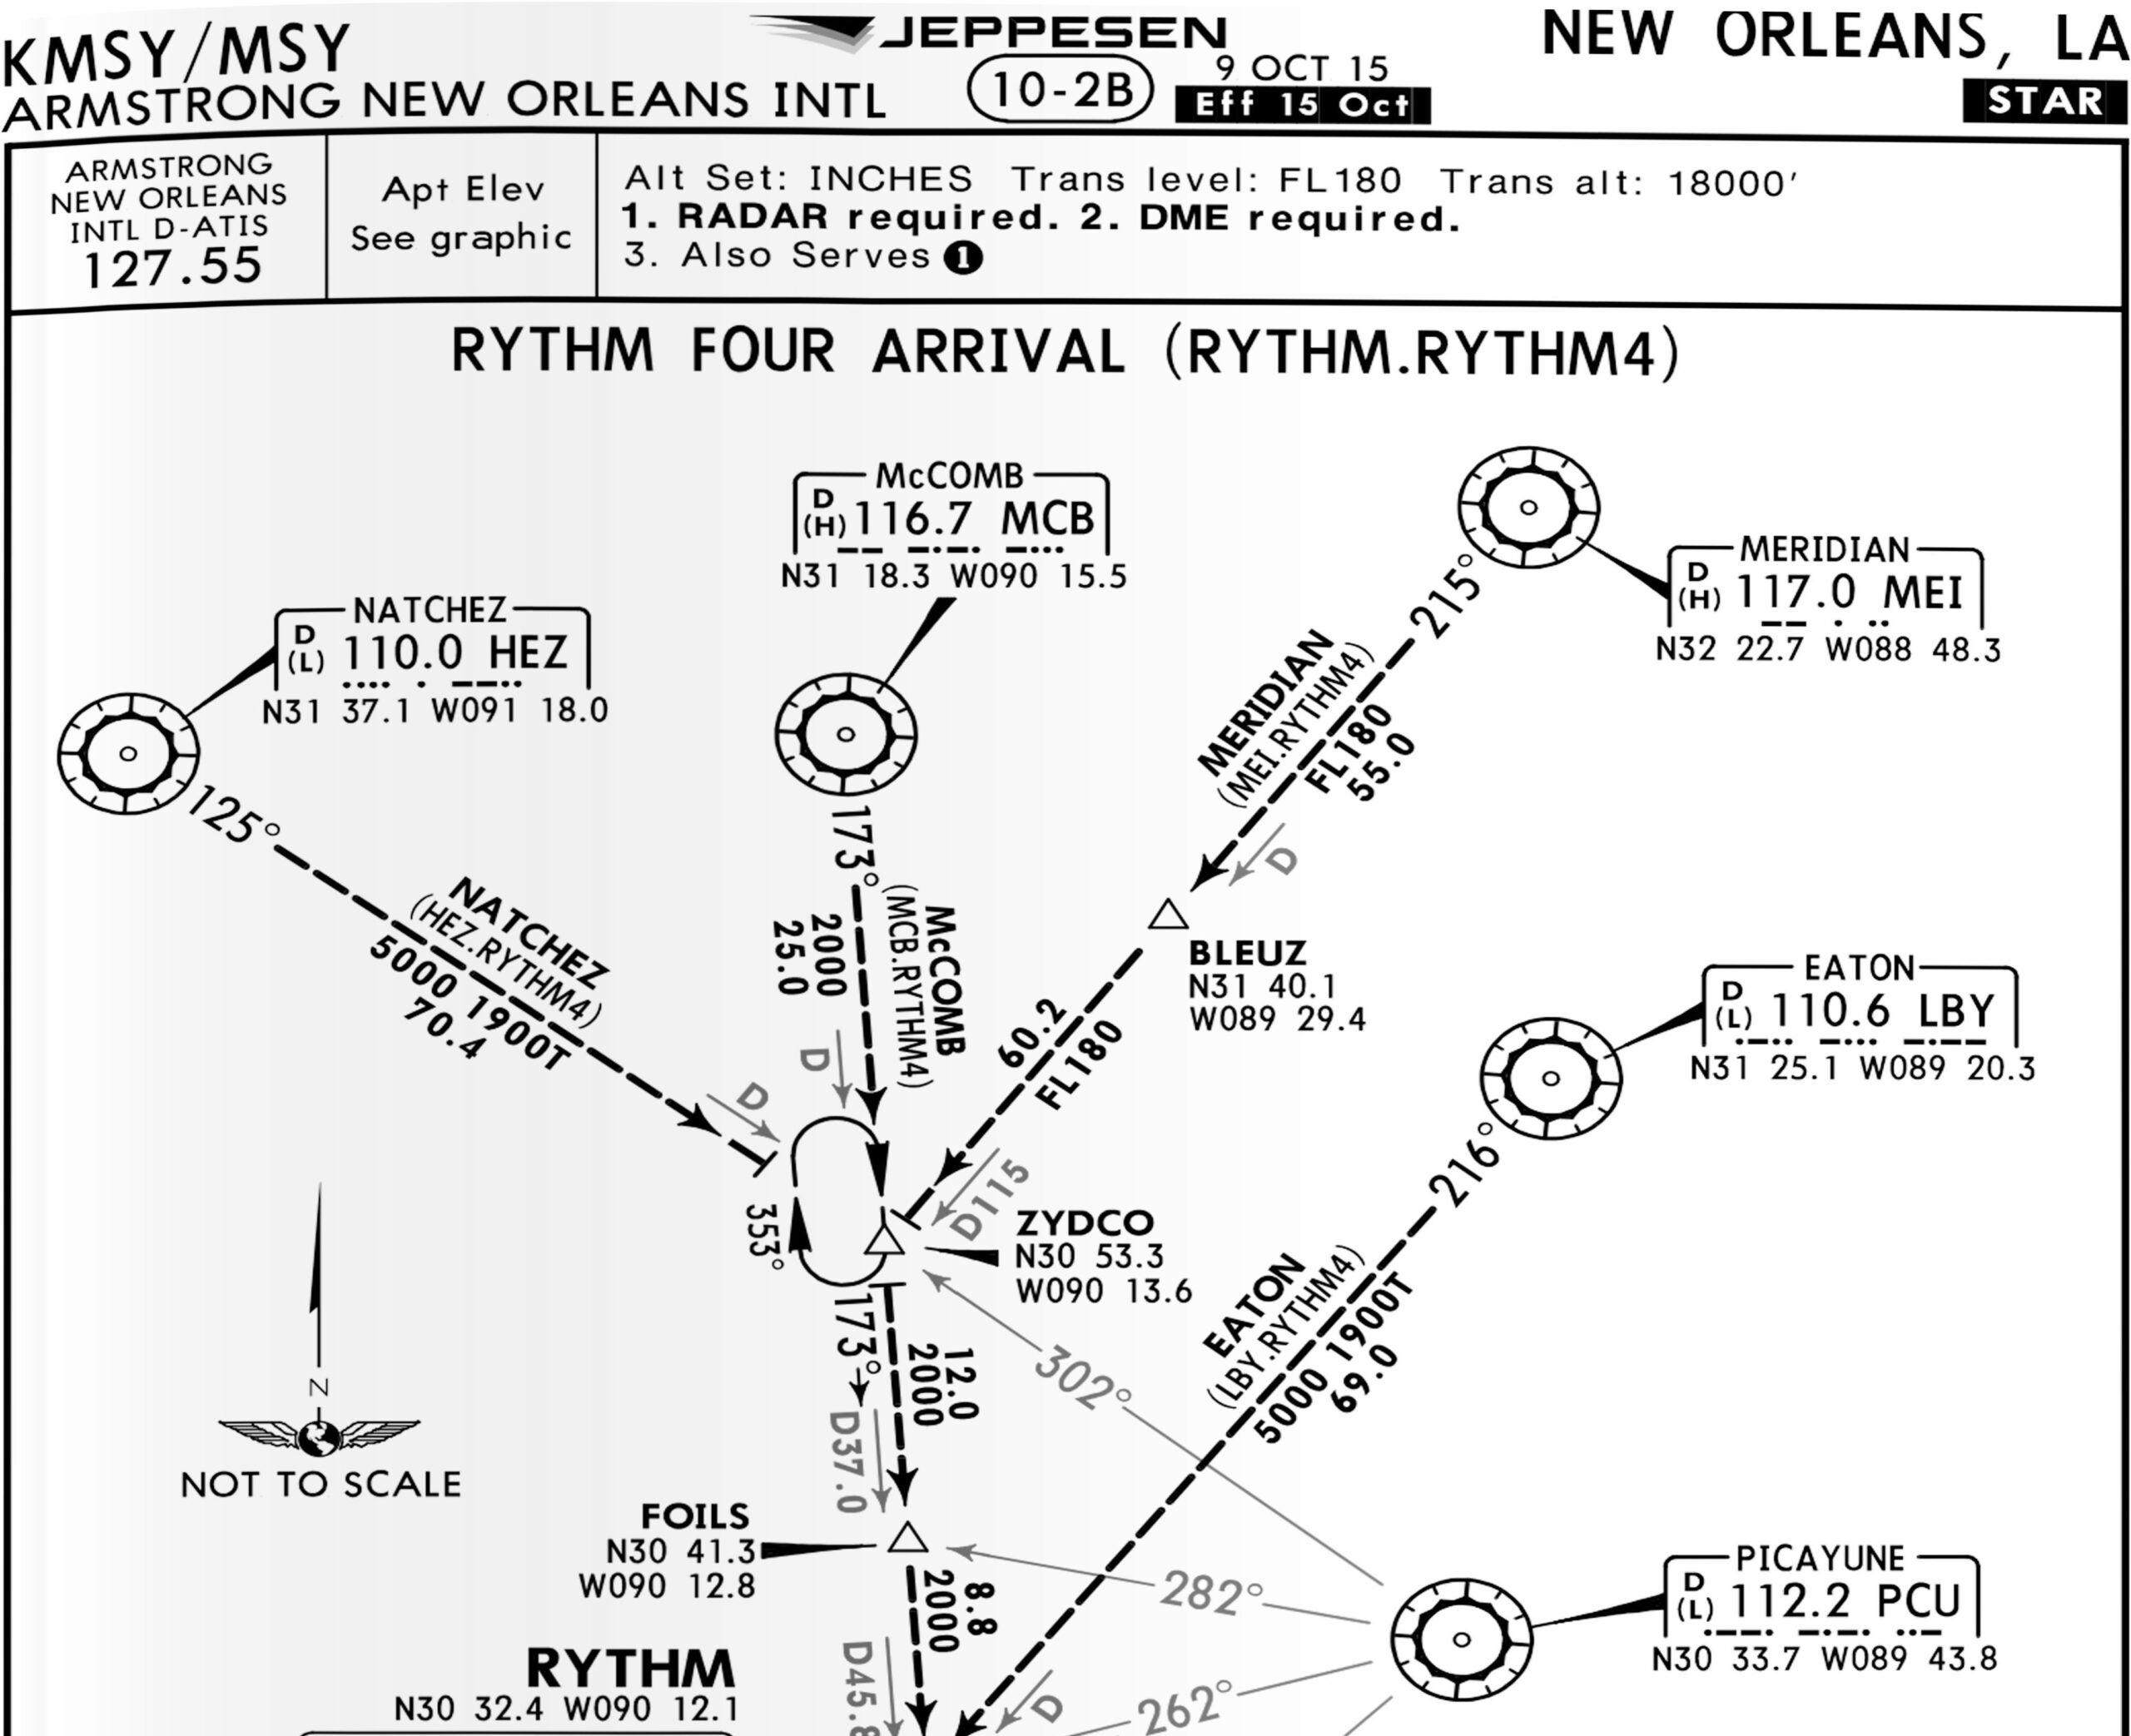 Chart Wise: Standard Terminal Arrival Route